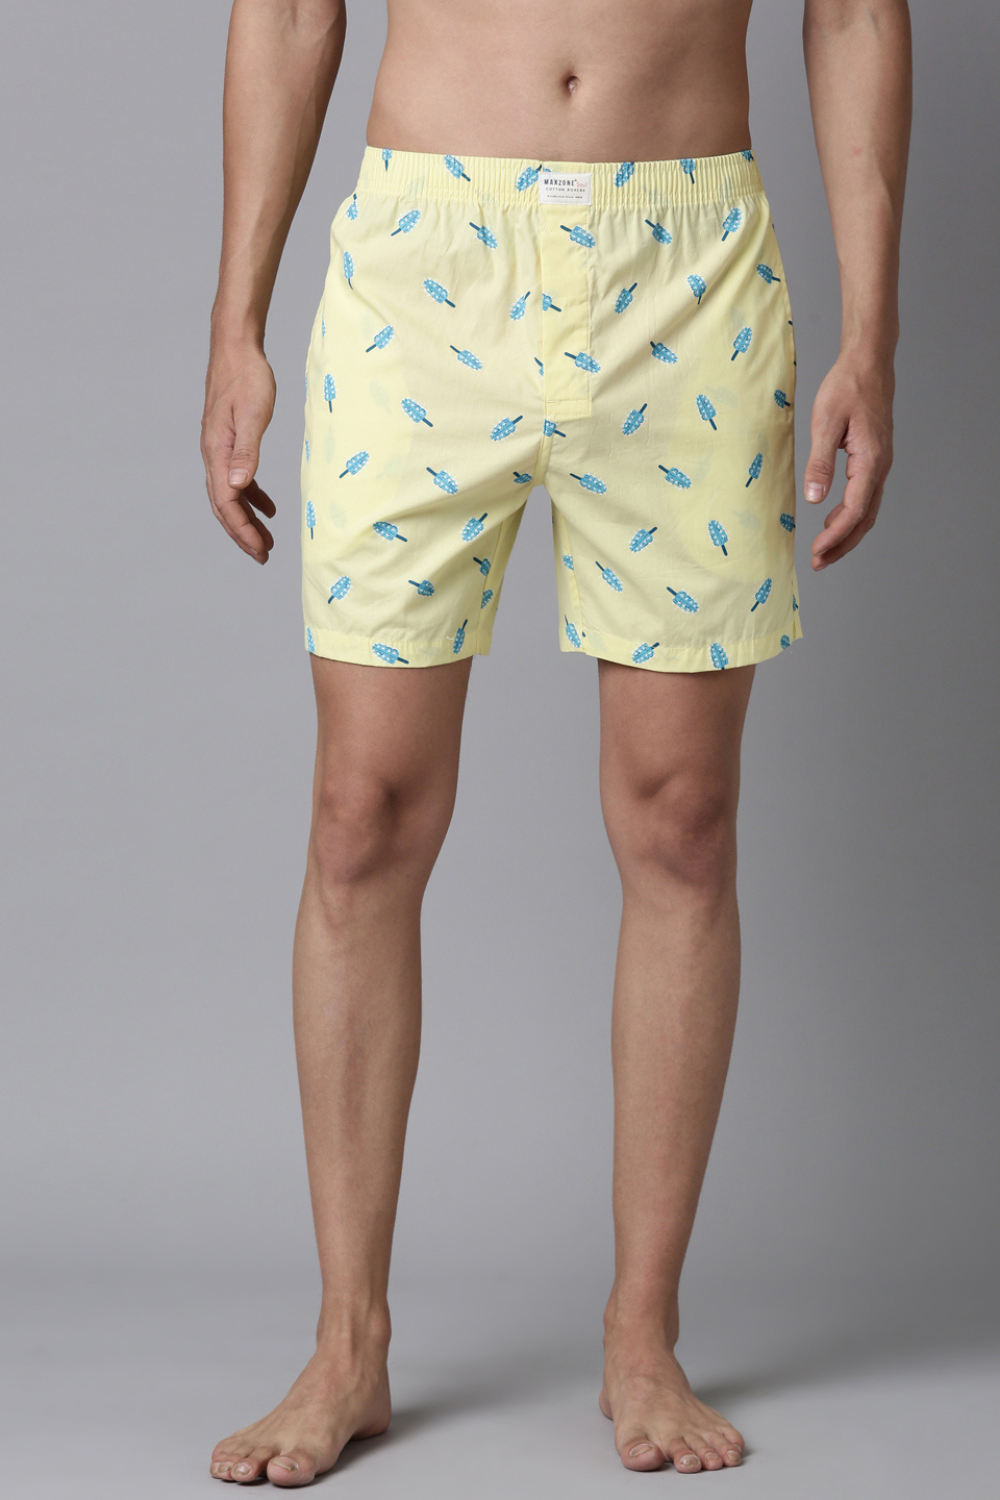 Midnight-Black Printed & Pastel-Yellow Printed 365 Boxers Combo  Maxzone Clothing   